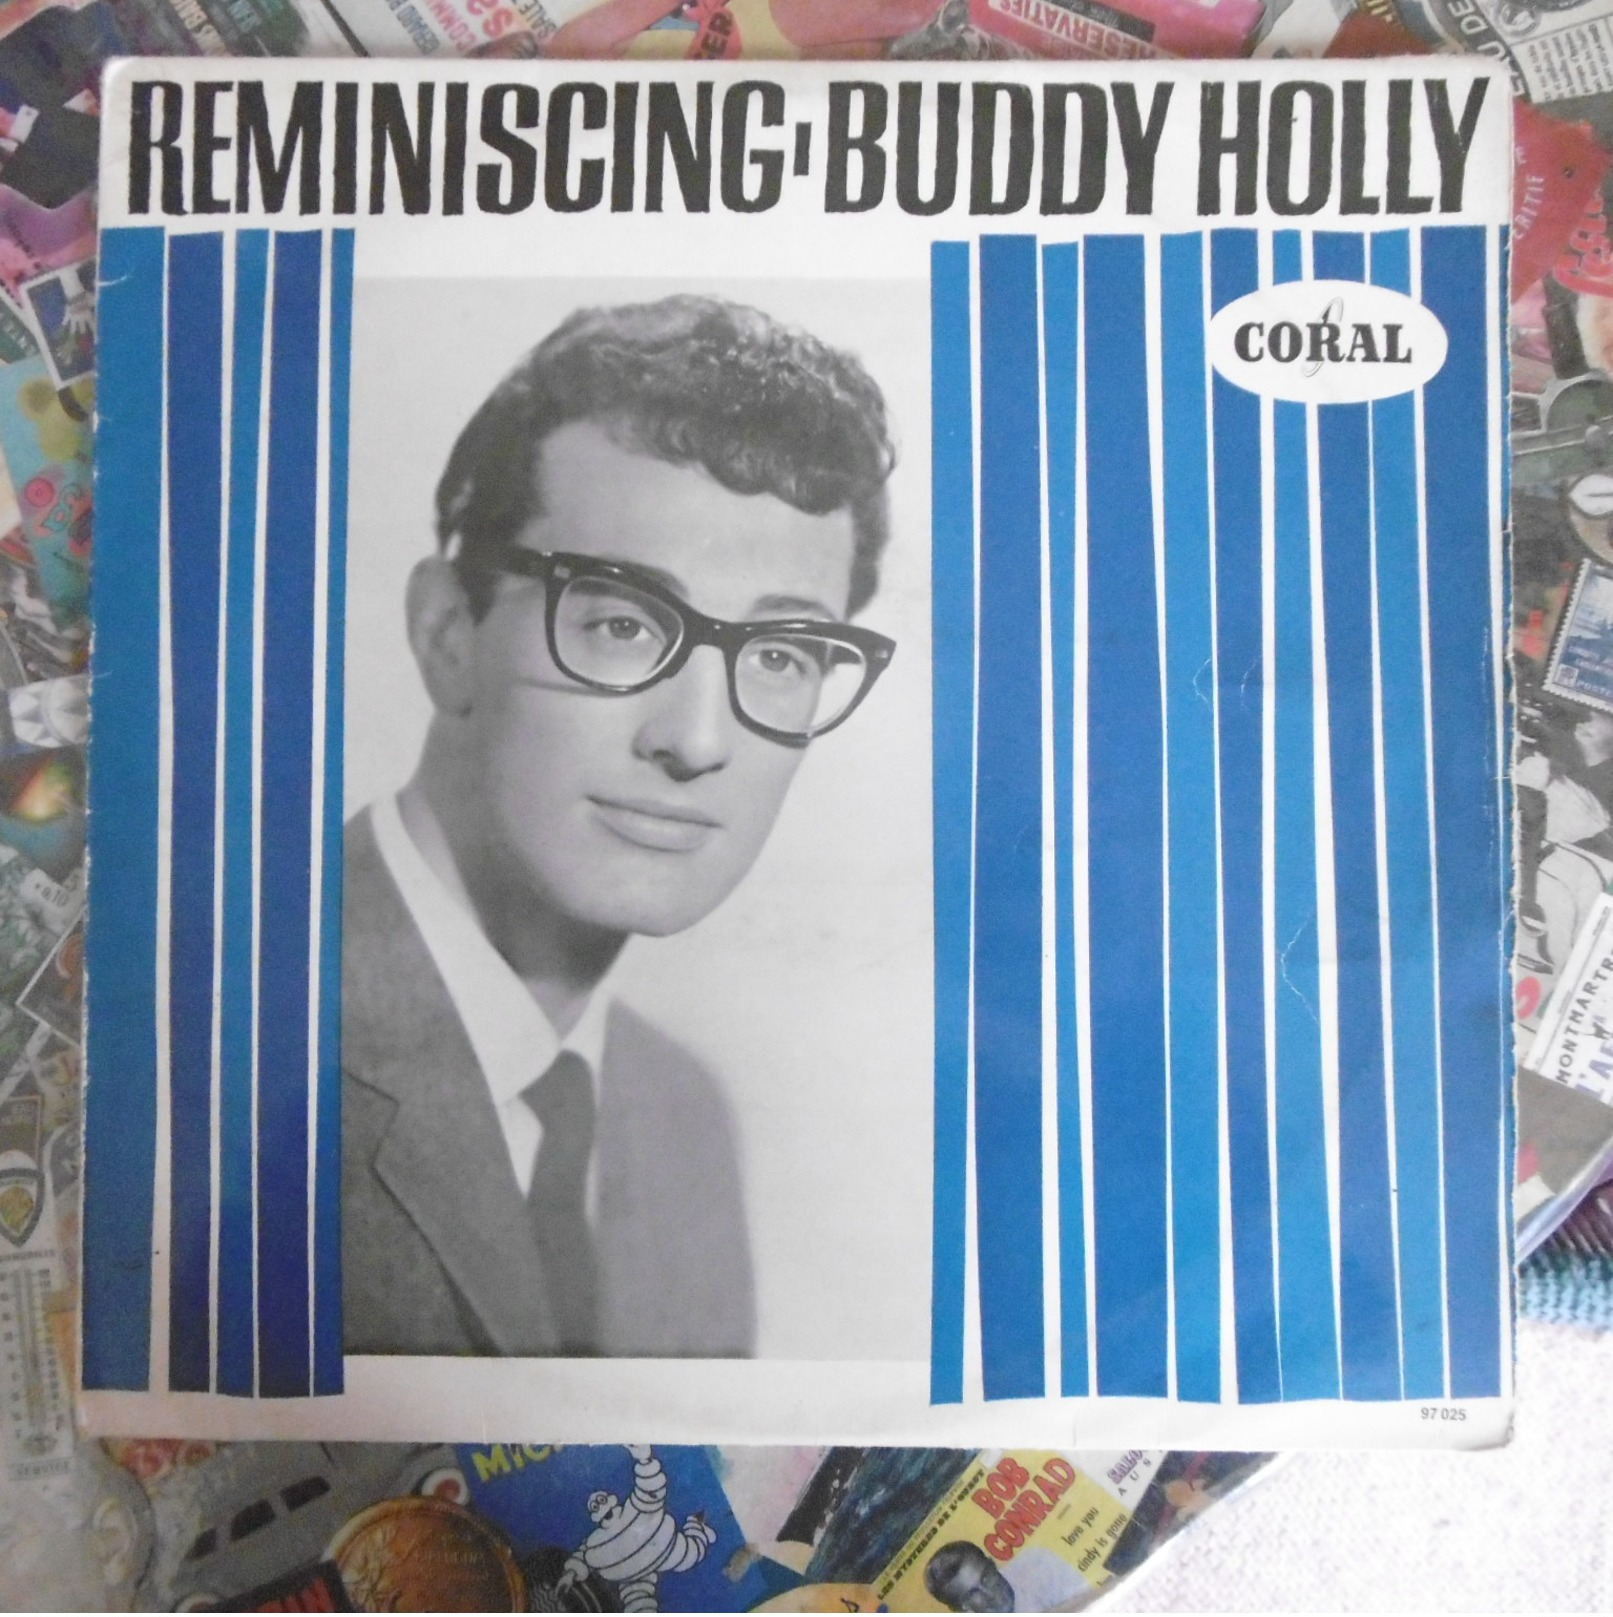 33 TOURS  REMINISCING   BUDDY  HOLLY     CORAL  97025 - Rock